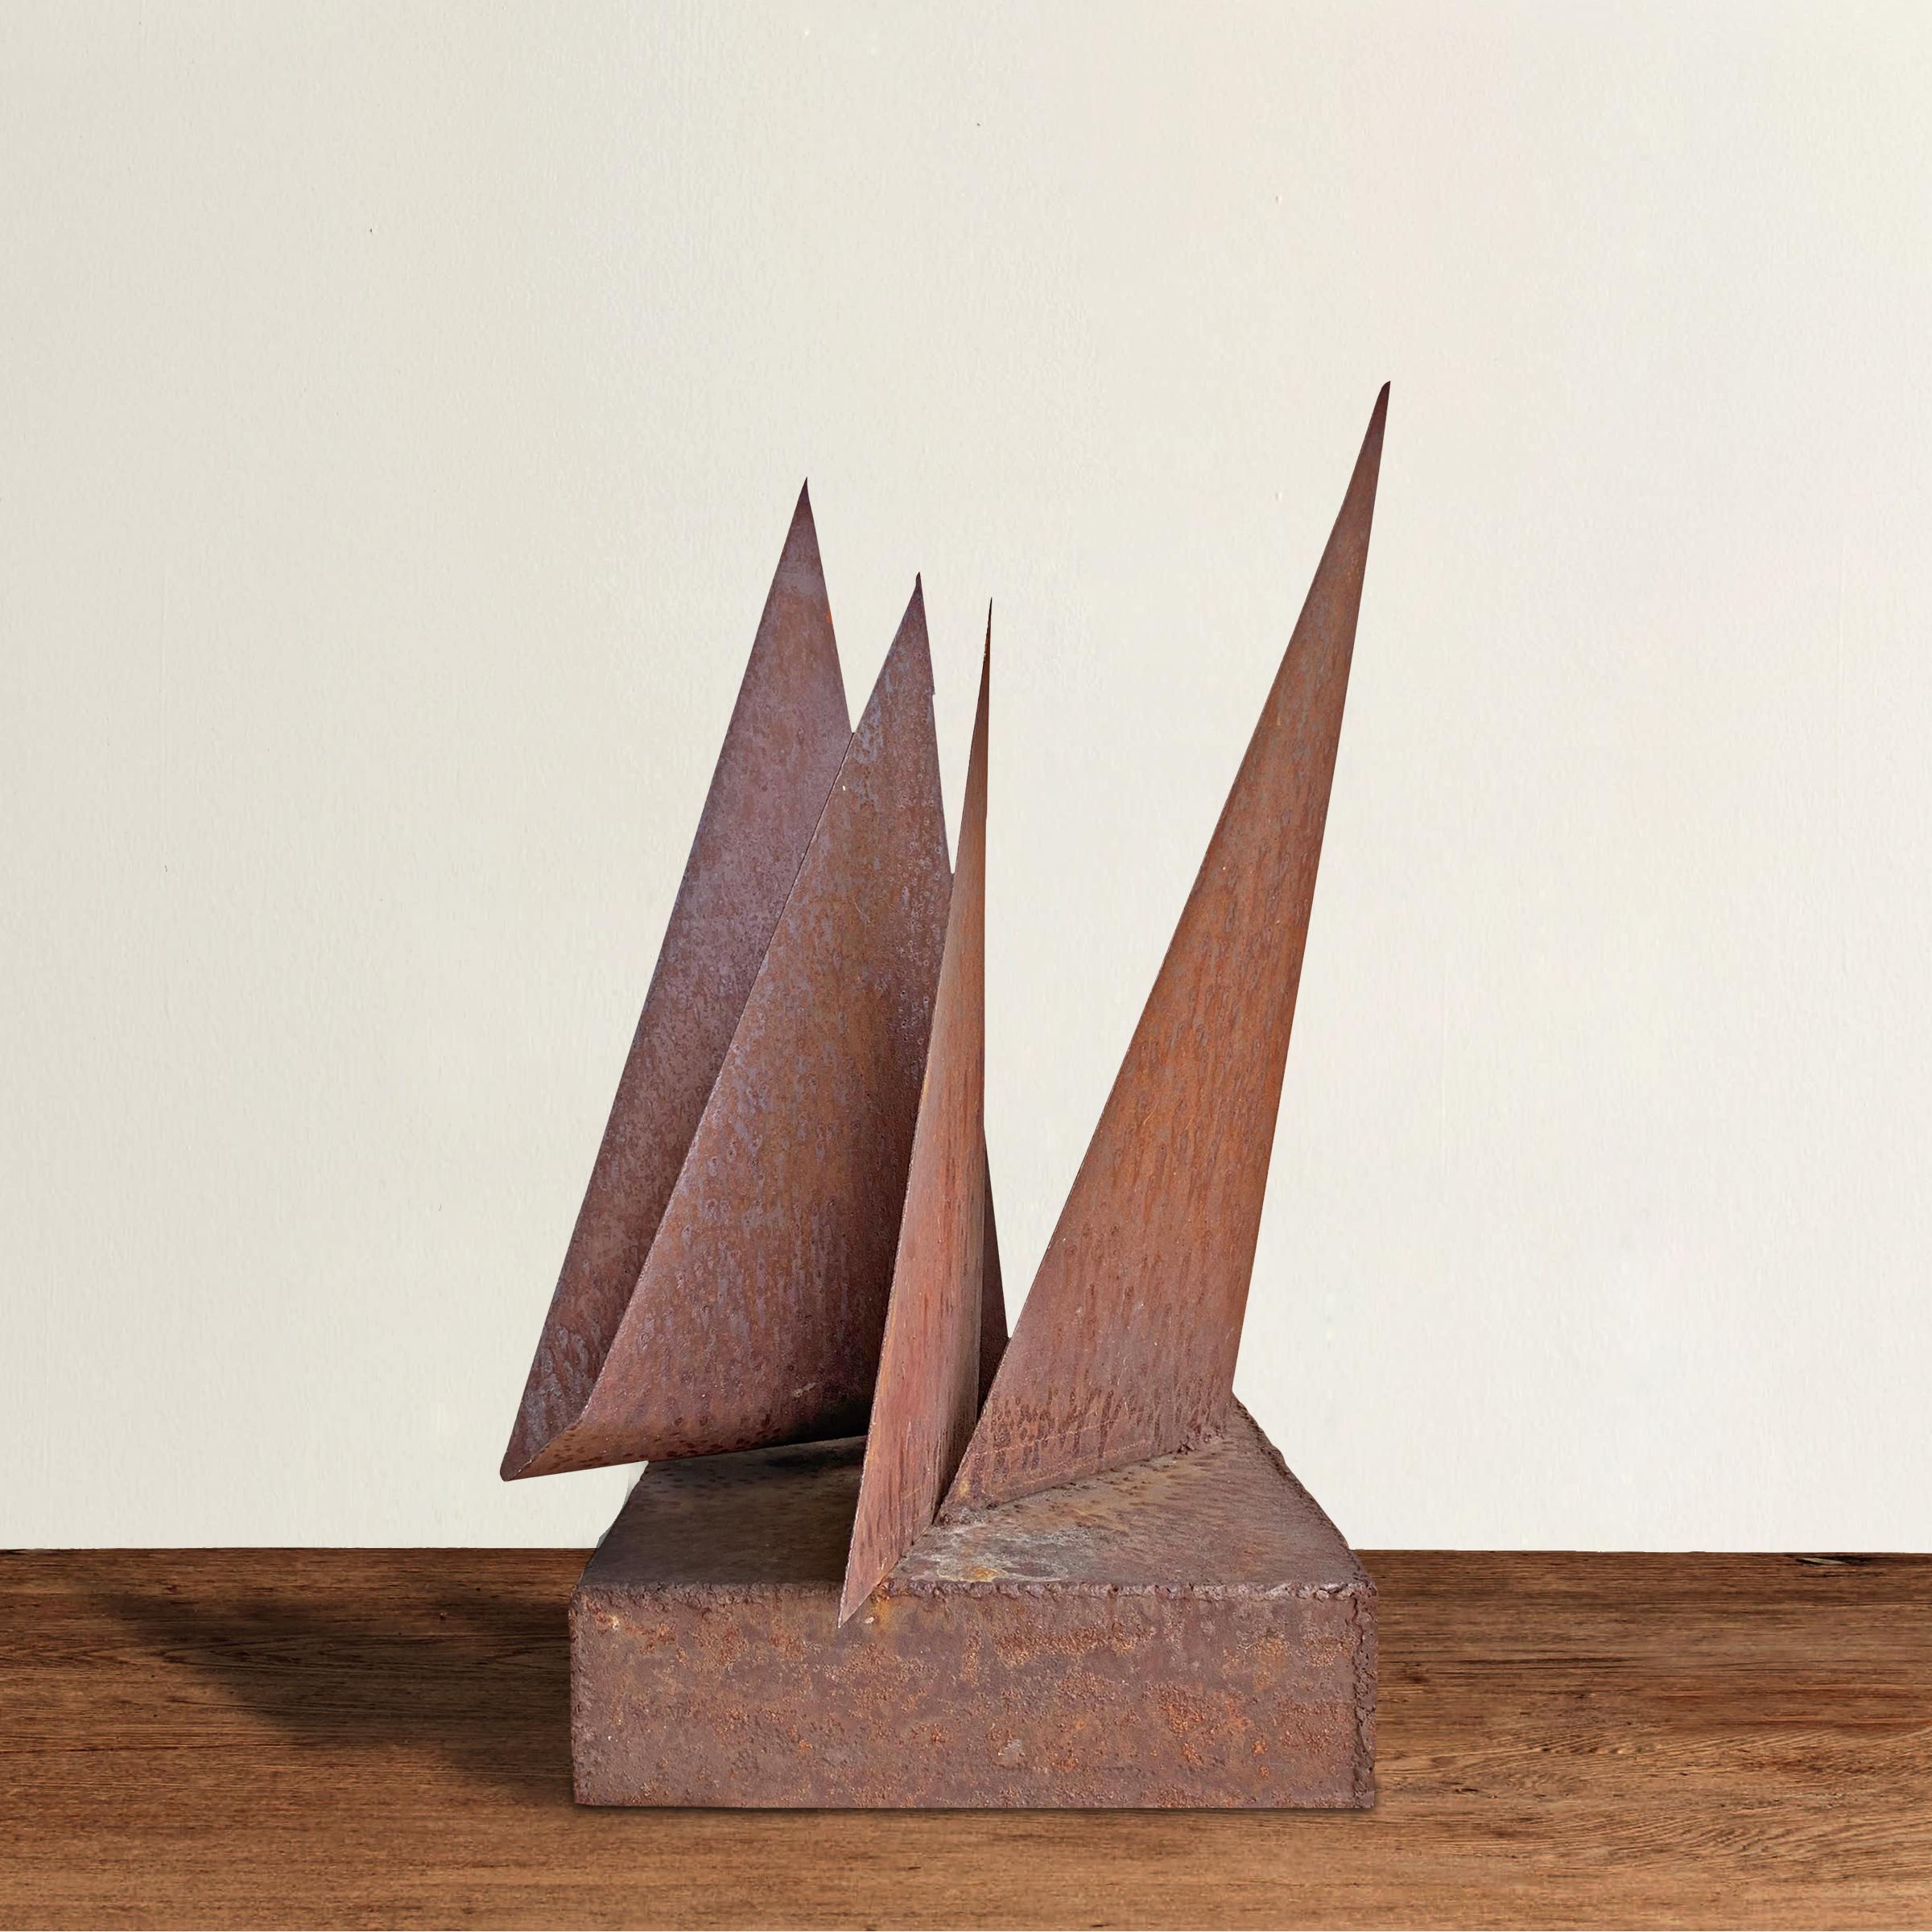 A striking mid-20th century Brutalist iron sculpture constructed with four large triangle shapes reminiscent of sail boats in a harbor, welded to a rectangular base and with a wonderful raw texture and fabulous rust finish.